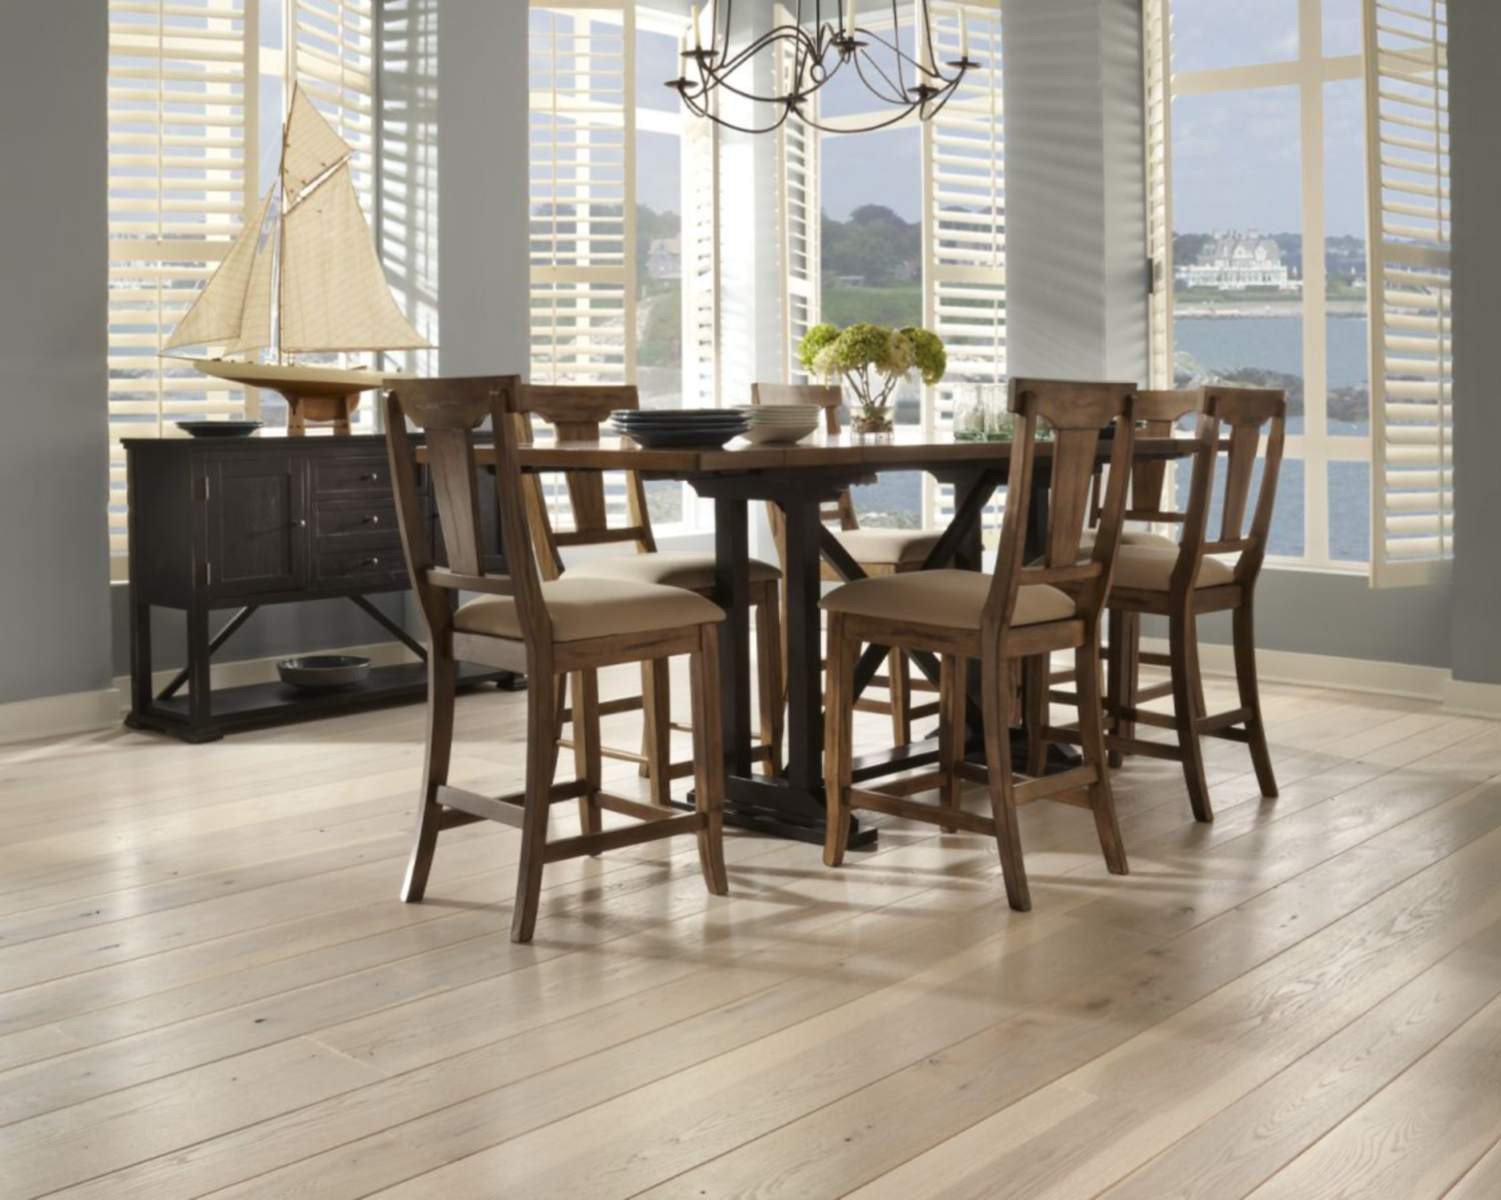 hardwood floor refinishing bloomington il of top 5 brands for solid hardwood flooring pertaining to a dining room with carlisle hickorys wide plank flooring